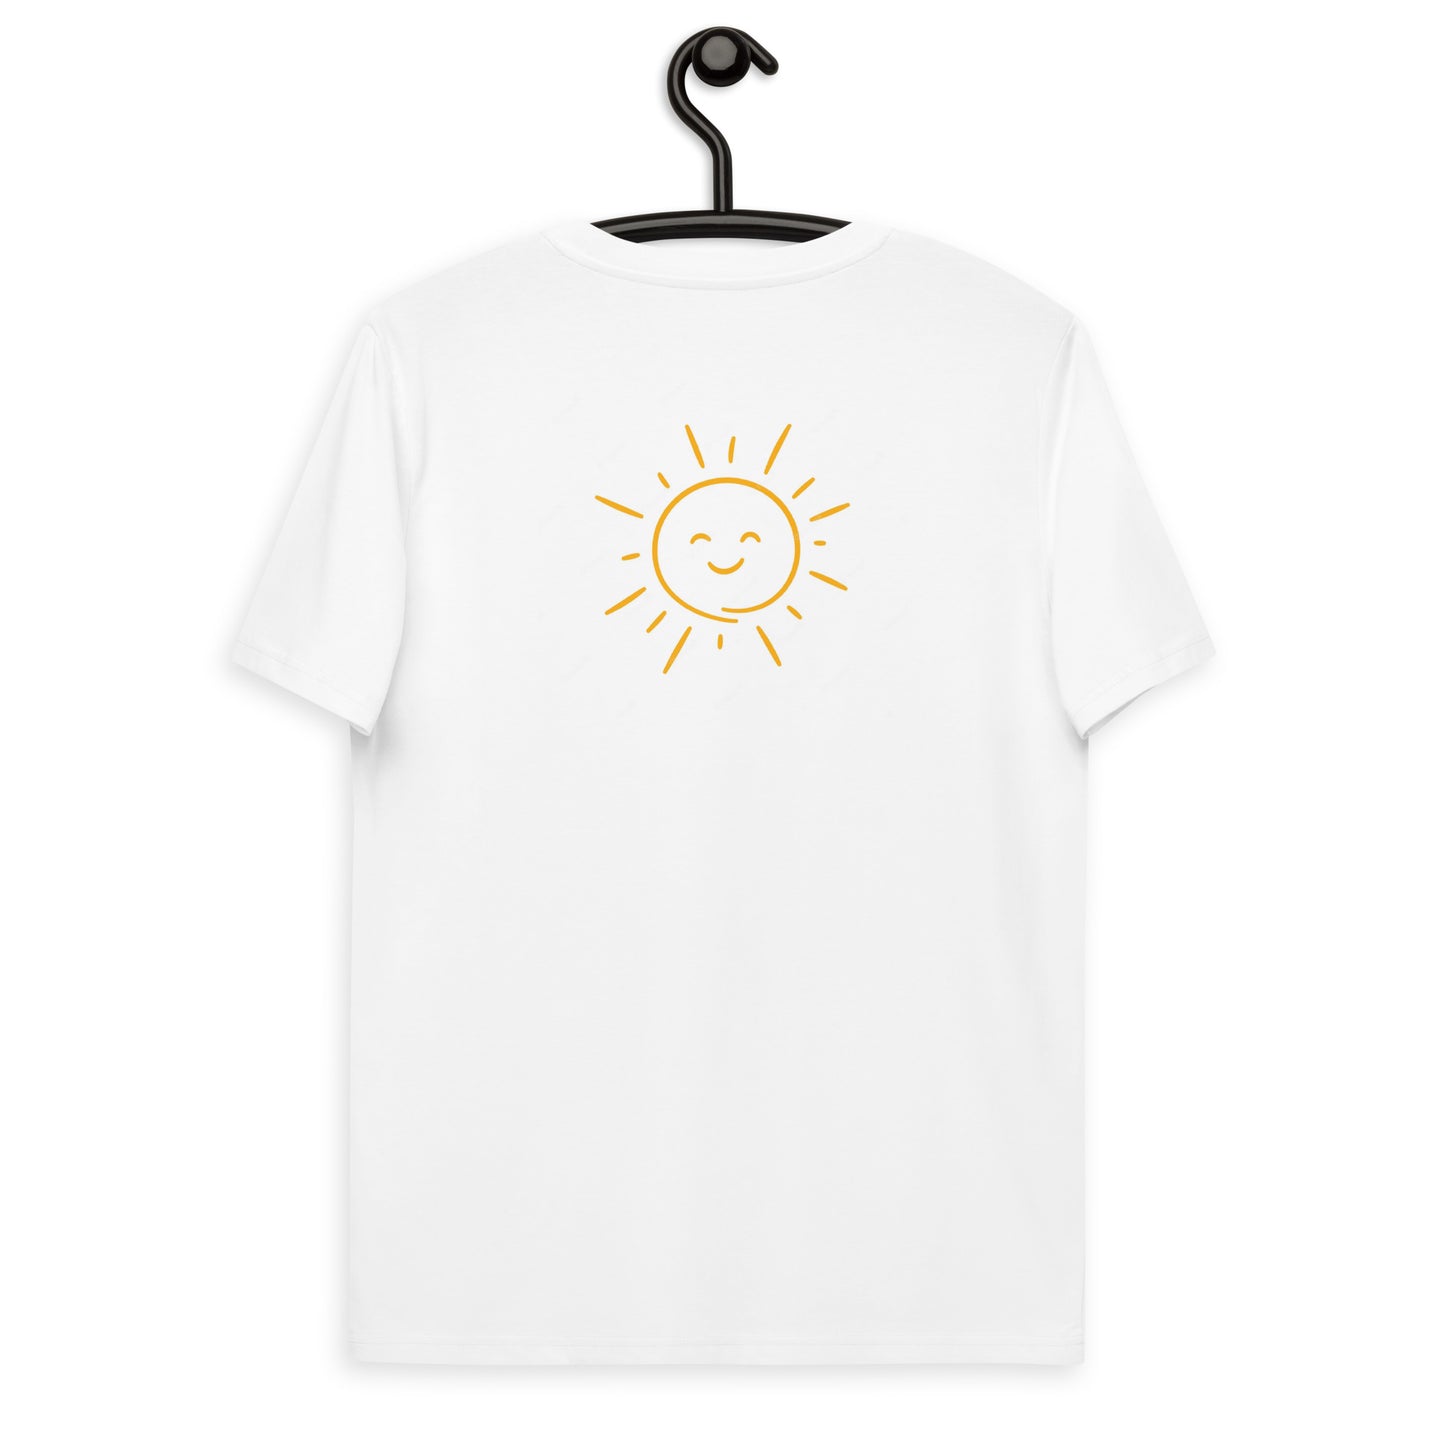 "Be the sunshine" Embroidered Organic Cotton T-Shirt